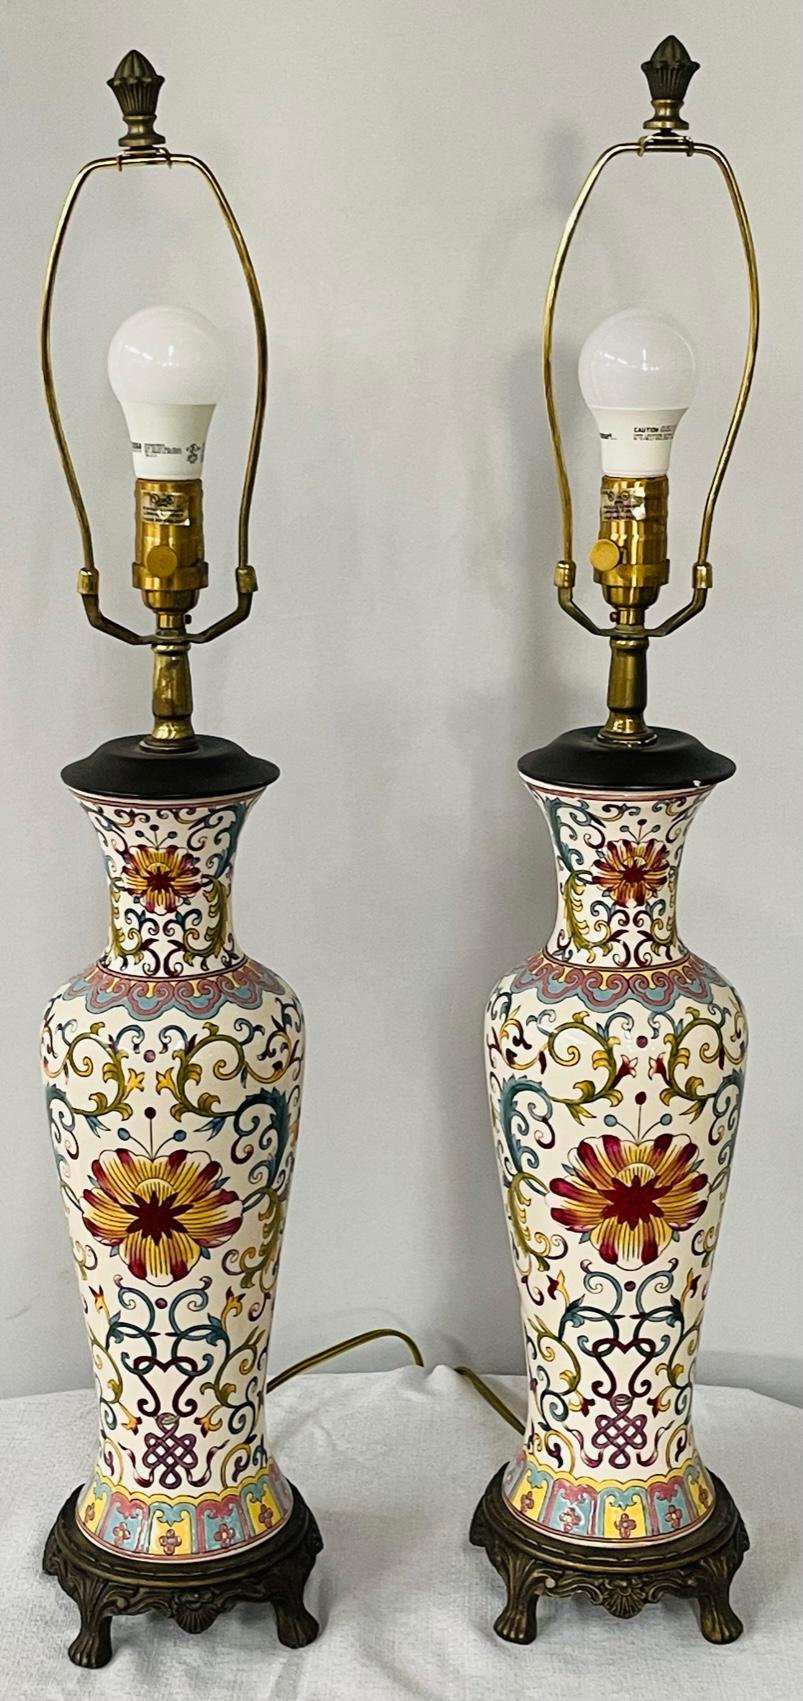 A 1970's pair of hand painted porcelain lamps in a shape of urns featuring a multi-colored geometrical motif design and raised on a wooden base. The lamps comes with Boho chic style linen shades decorated with small black tassels. Very chic, the